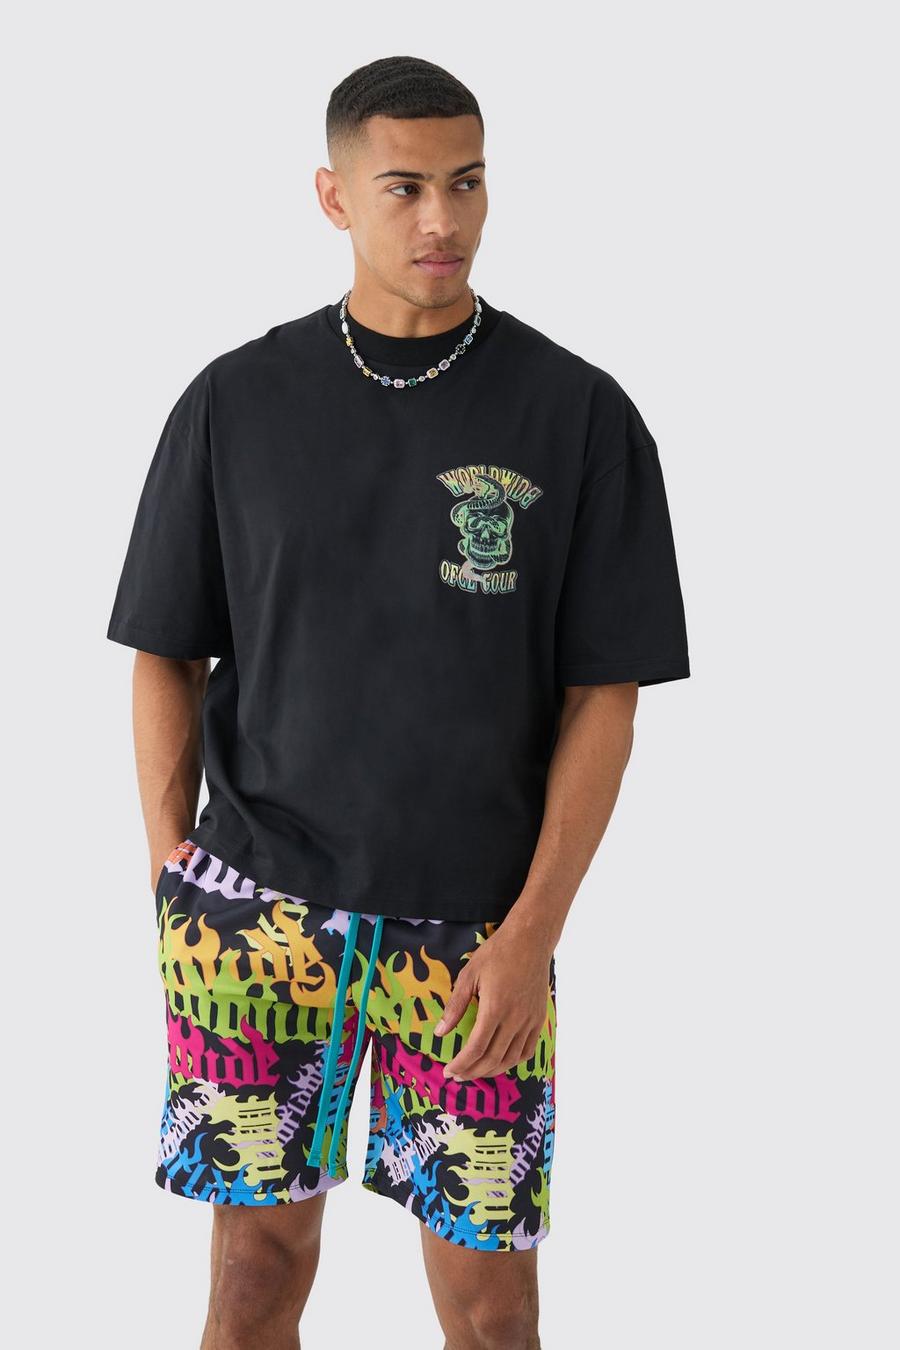 Black Oversized Boxy Extended Neck Extreme Offcl Tour T-shirt